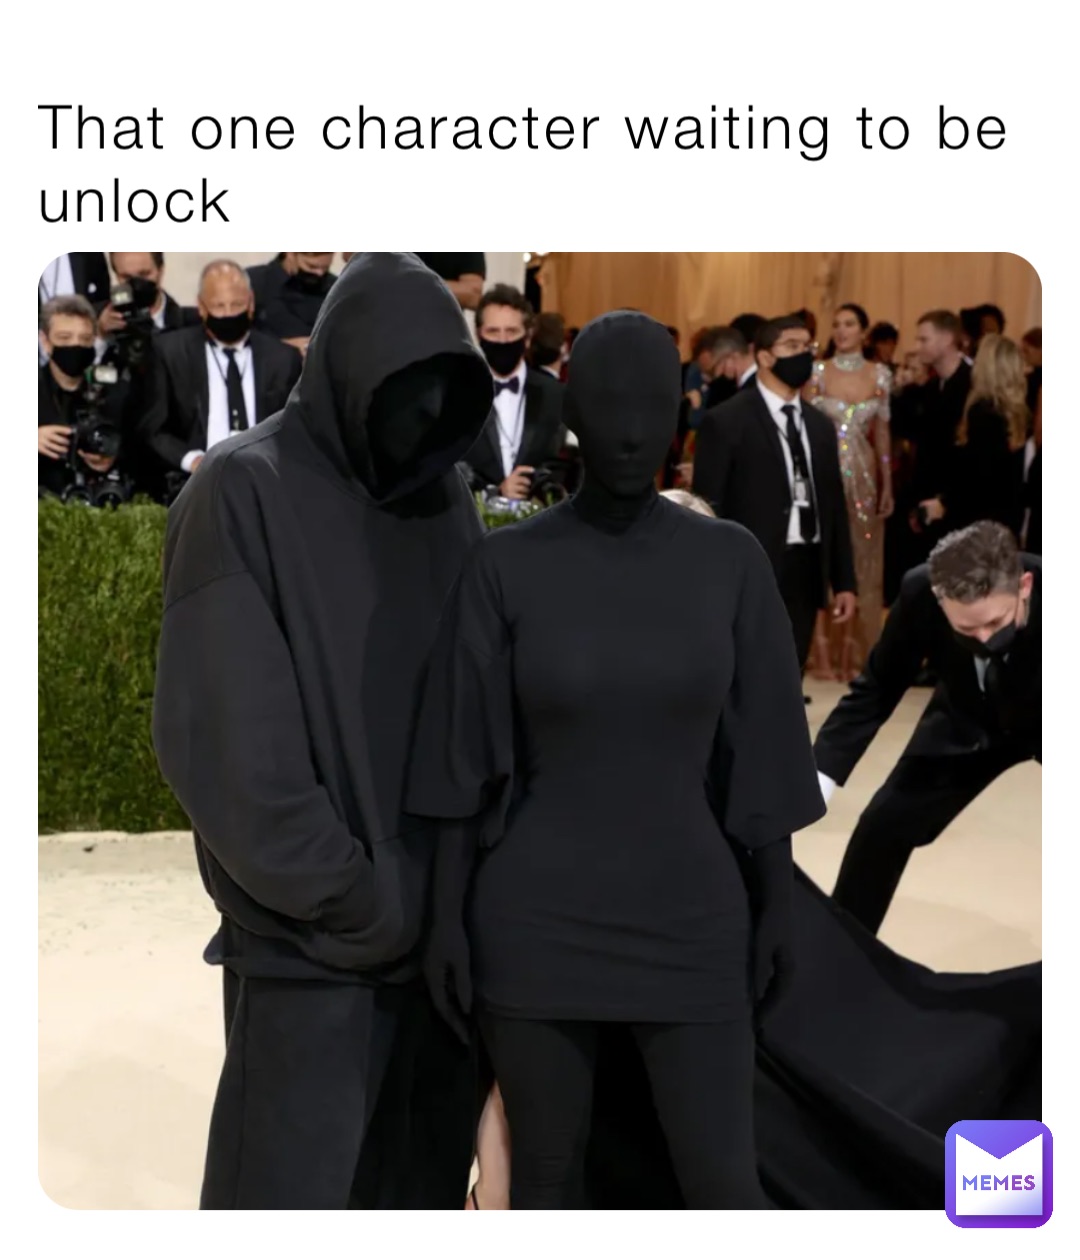 That one character waiting to be unlock